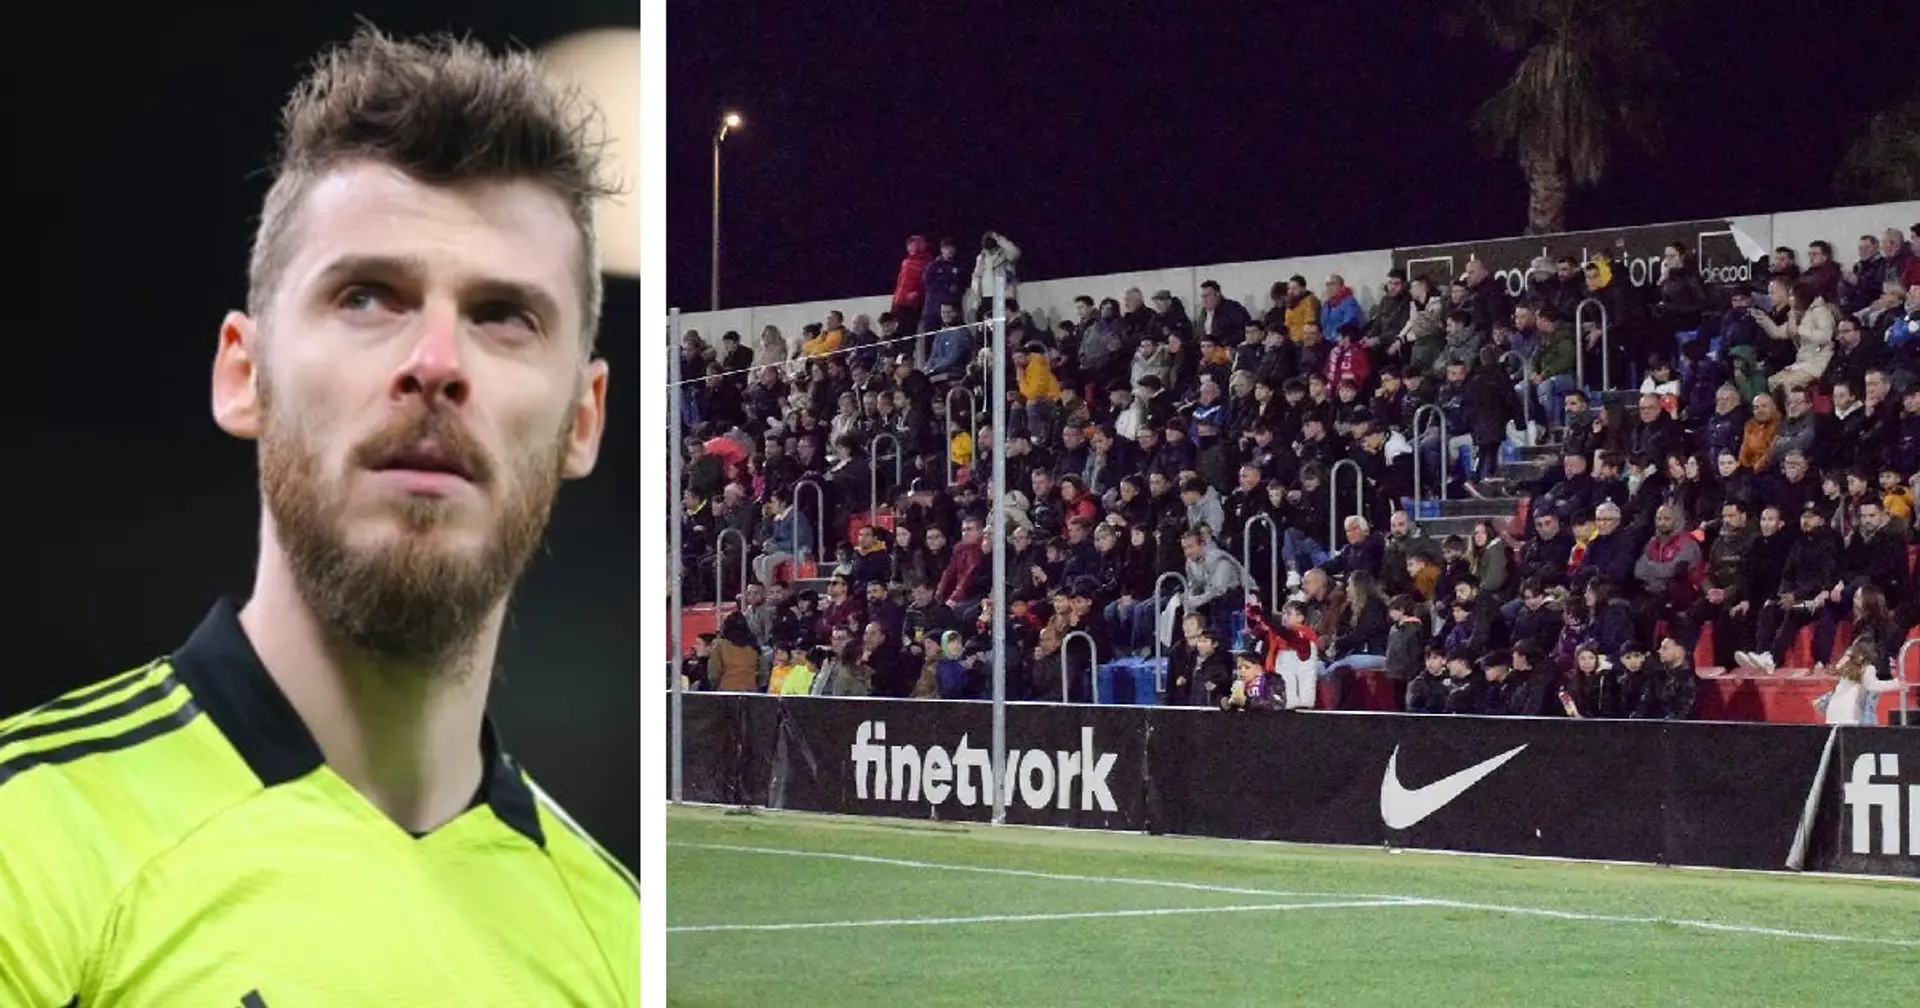 De Gea set for shock return to football - he may buy and play for the club